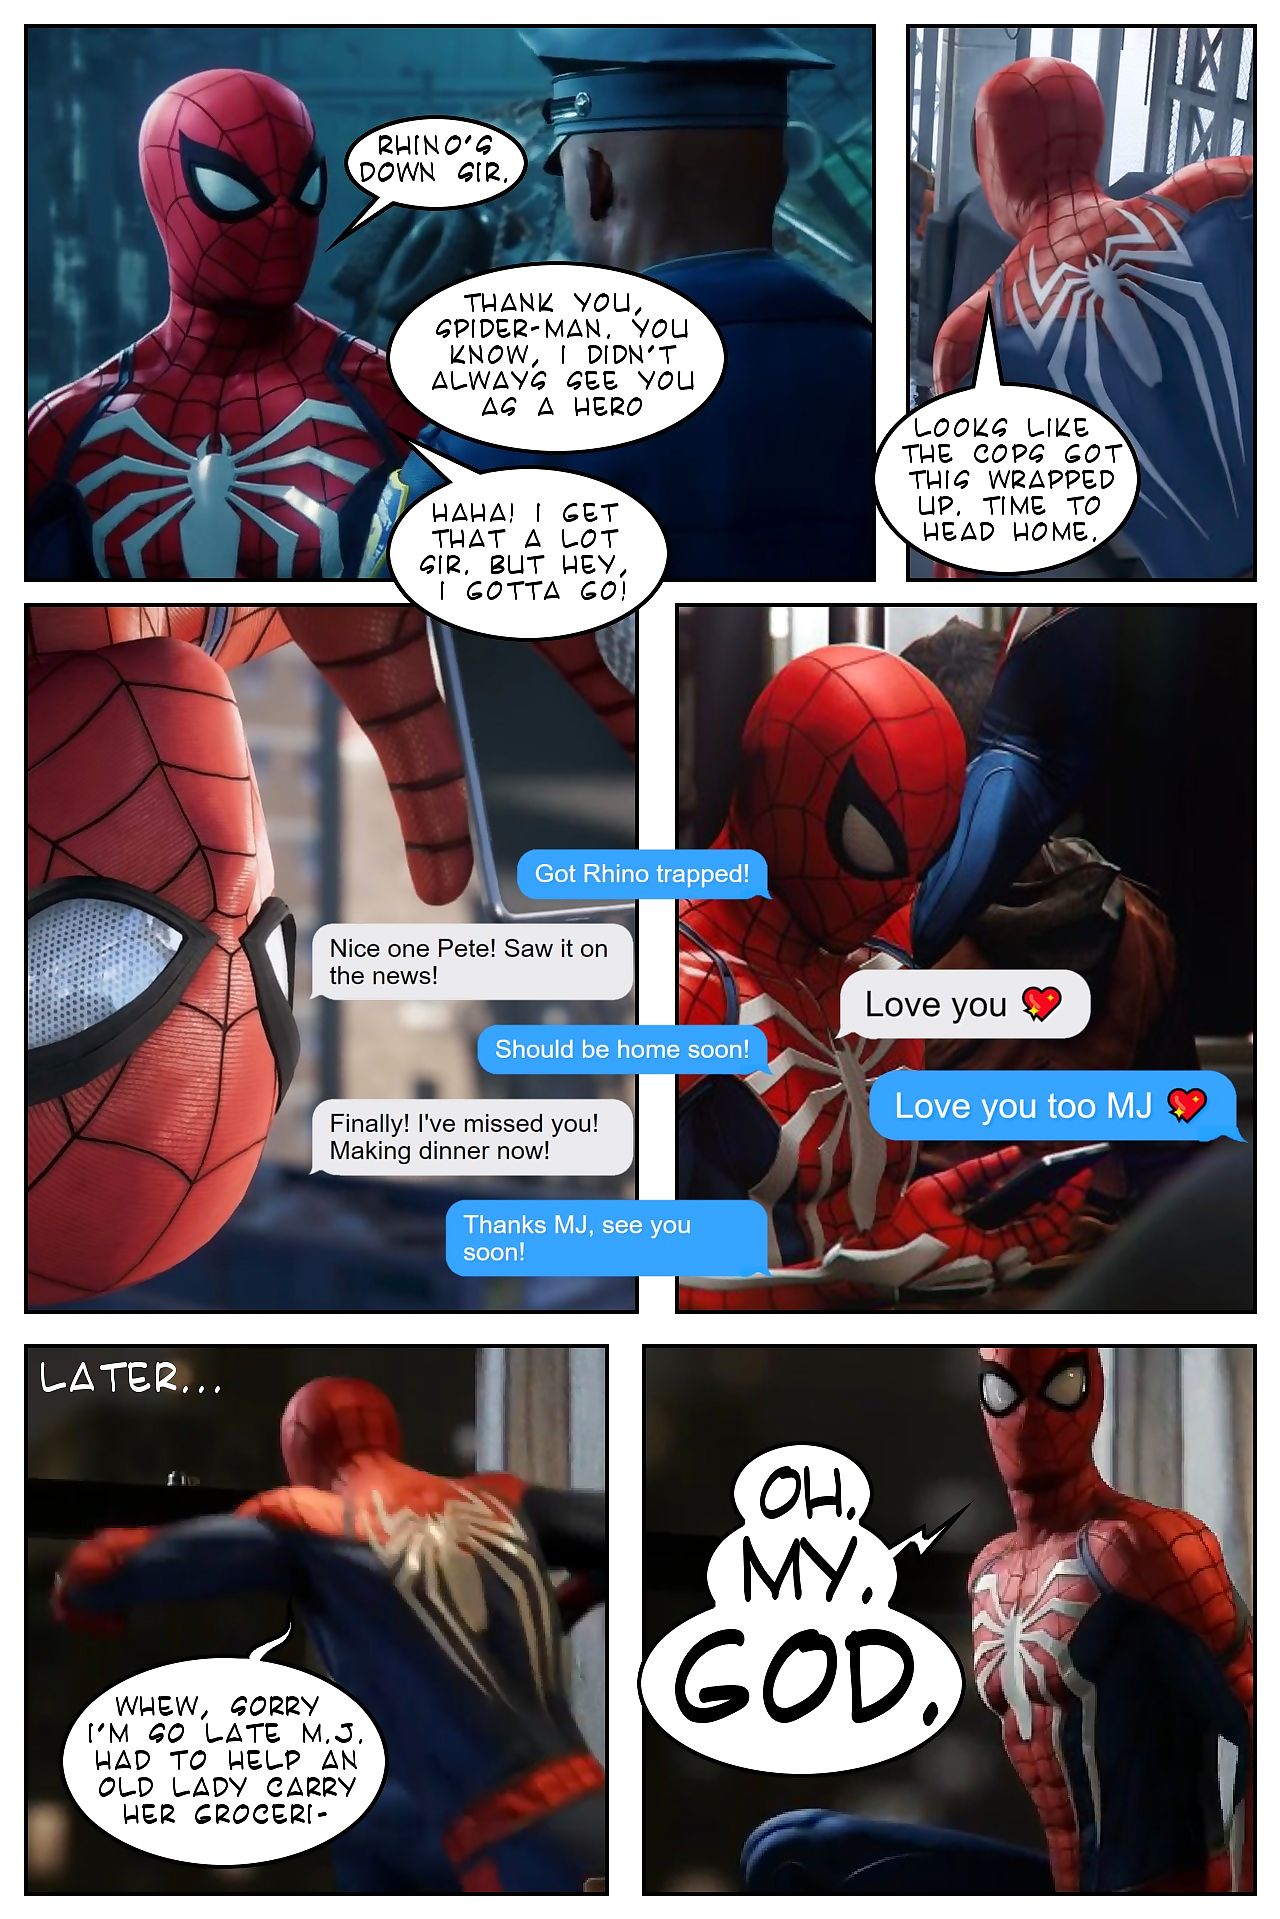 Spider-Man  Getting Home to MJ page 1